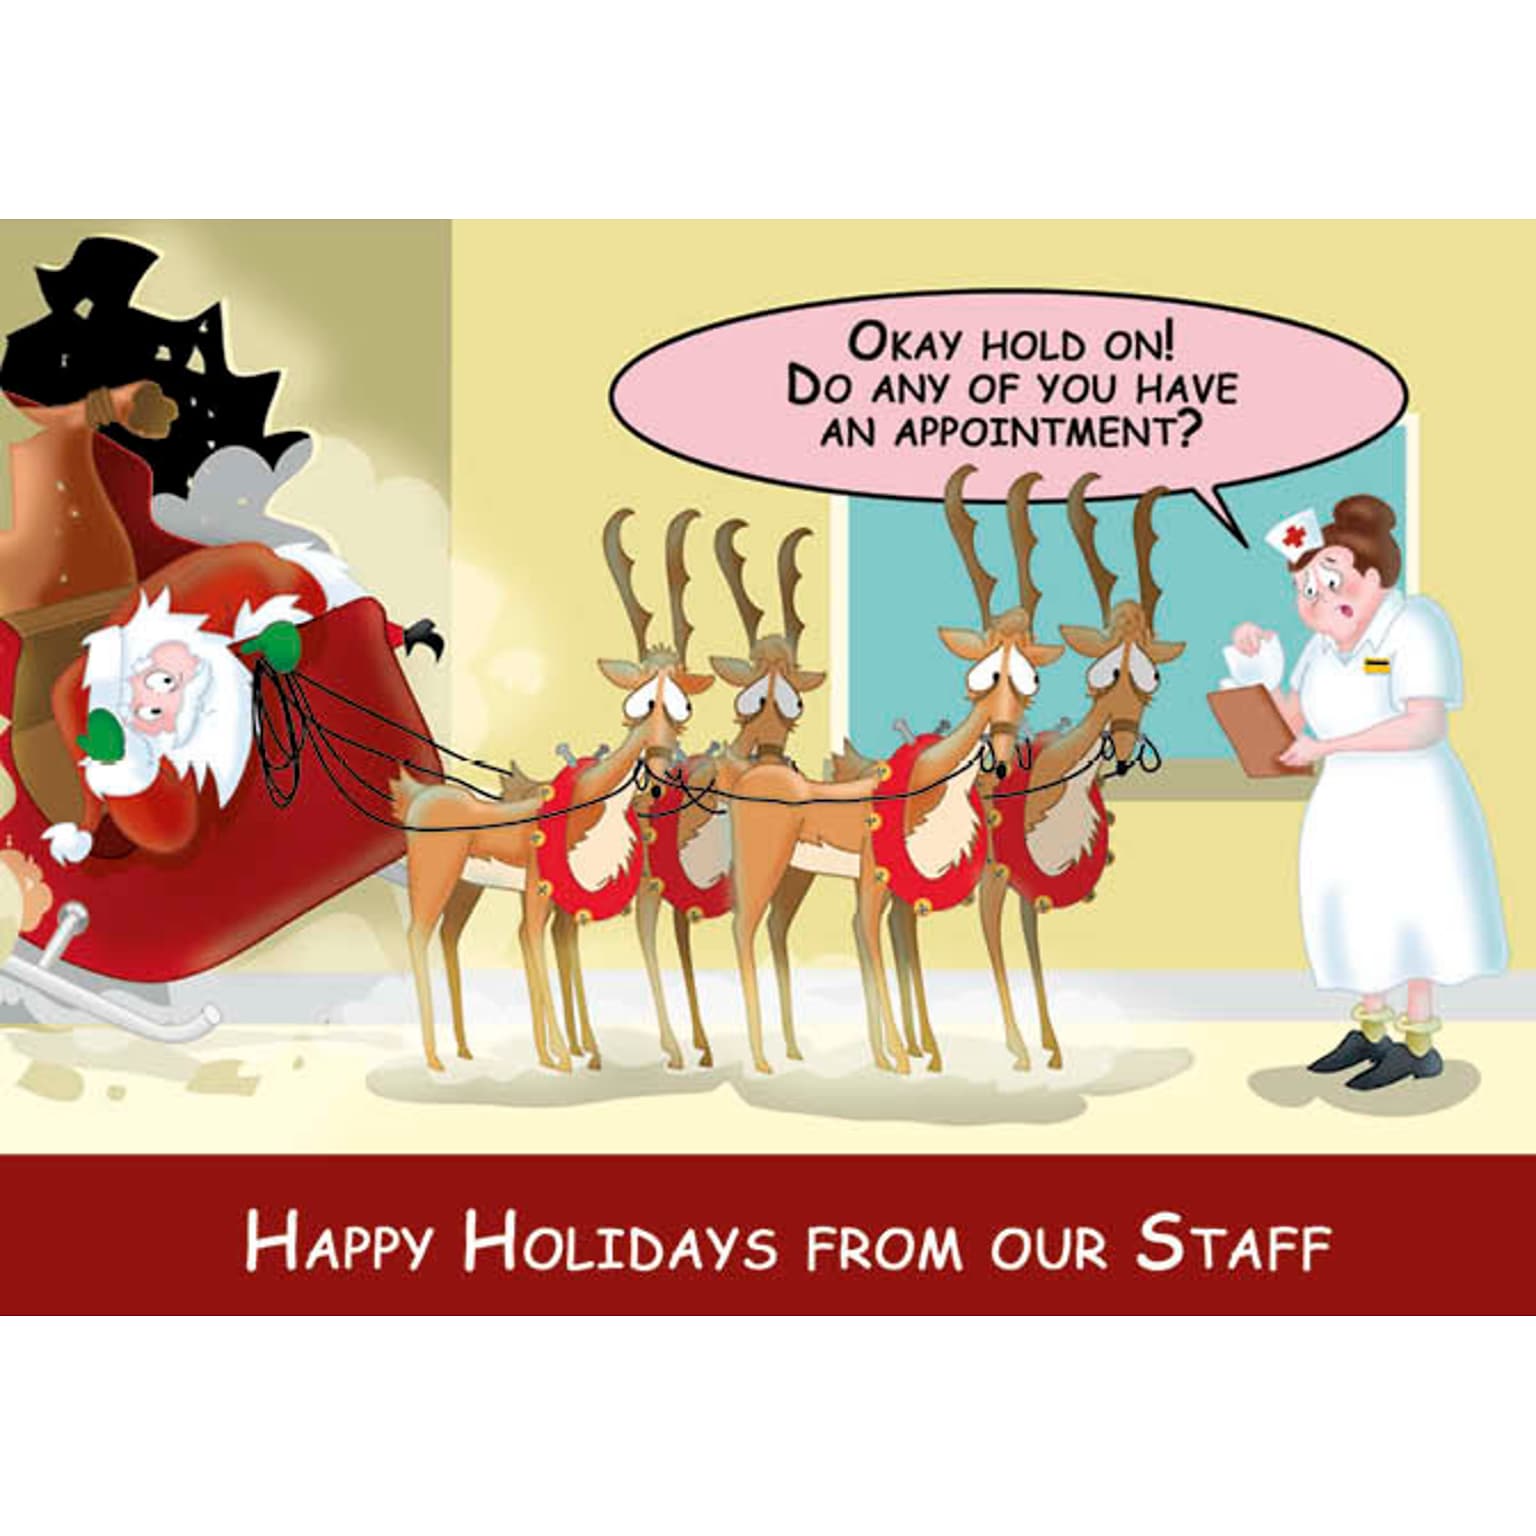 Happy Holidays From Our Staff Humerous Christmas Greeting Cards, With A7 Envelopes, 7 x 5, 25 Cards per Set